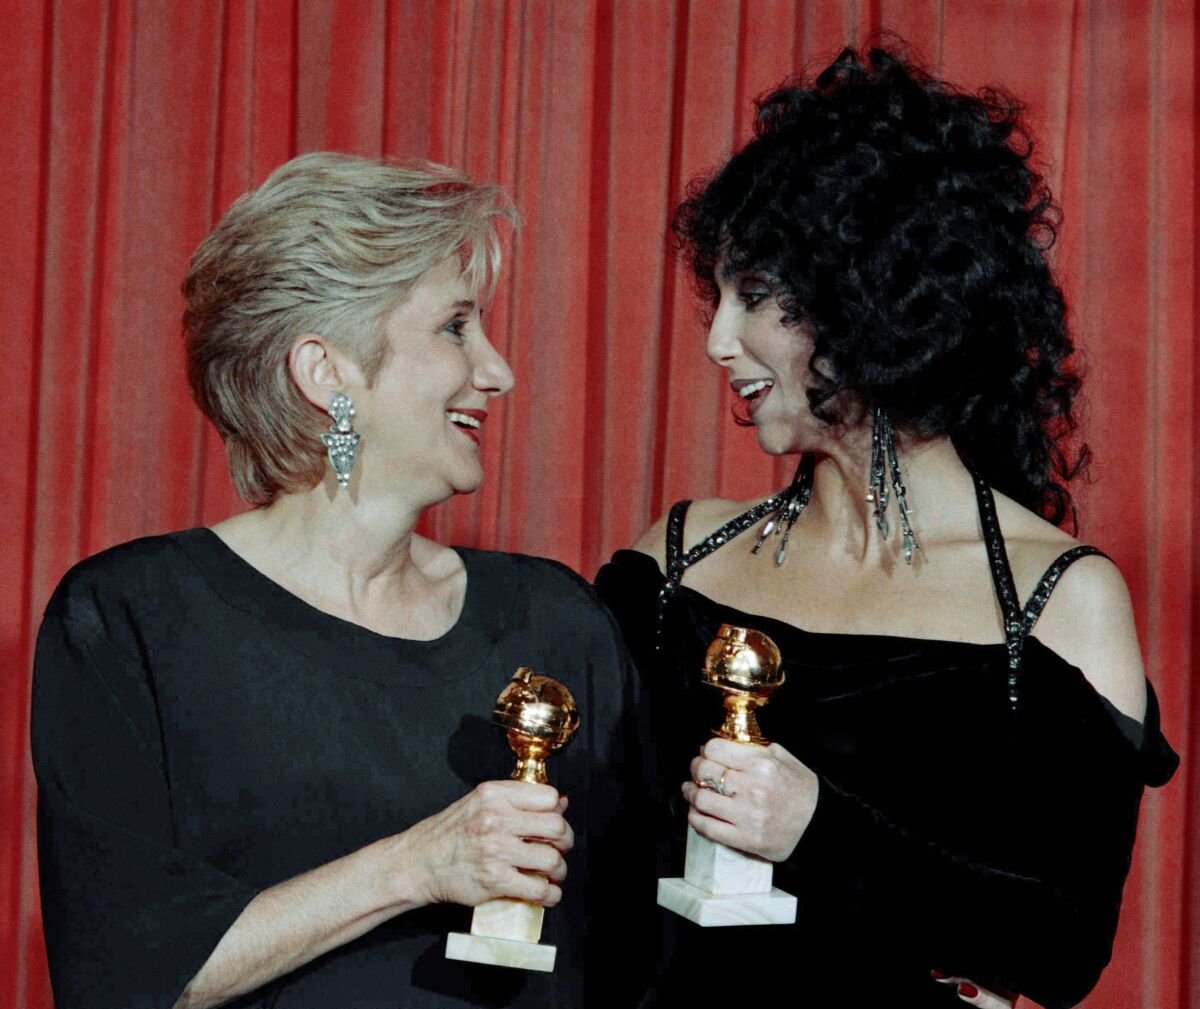 FILE - In this Jan. 24, 1988 file photo, Actress Olympia Dukakis, winner of a Golden Globe for "Best Performance in a Supporting Role" and Cher, winner of the "Best Performance by an Actress in a musical or comedy", hold the awards they received for performances in the hit movie "Moonstruck" at the Beverly Hilton Hotel. Olympia Dukakis, the veteran stage and screen actress whose flair for maternal roles helped her win an Oscar as Cher’s mother in the romantic comedy “Moonstruck,” has died. She was 89. (AP Photo/Reed Saxon, File)